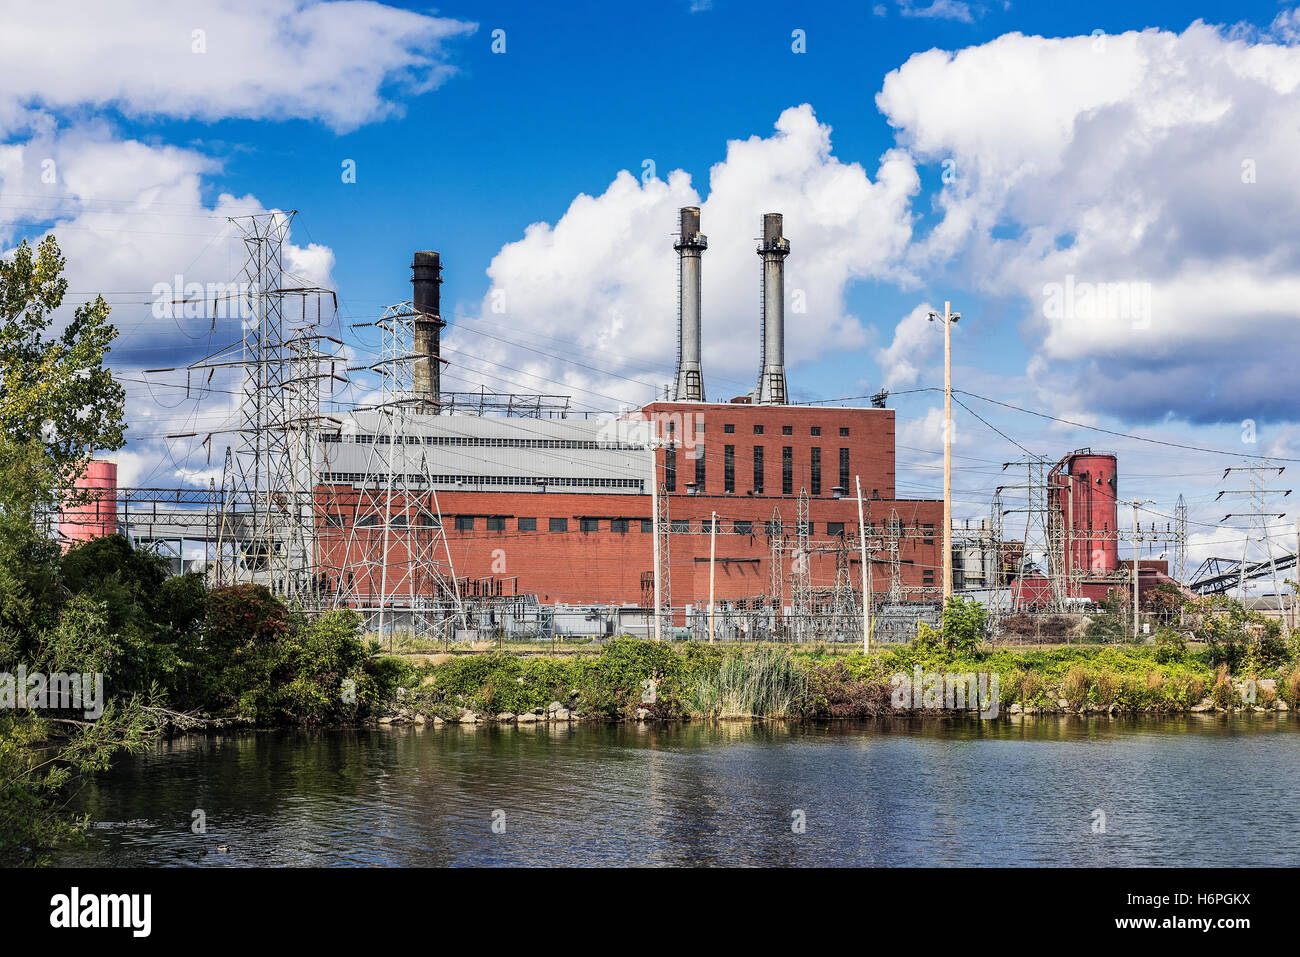 A NRG owned coal fired energy facility that plans to convert to a natural gas facility, Dunkirk, New York, USA. Stock Photo